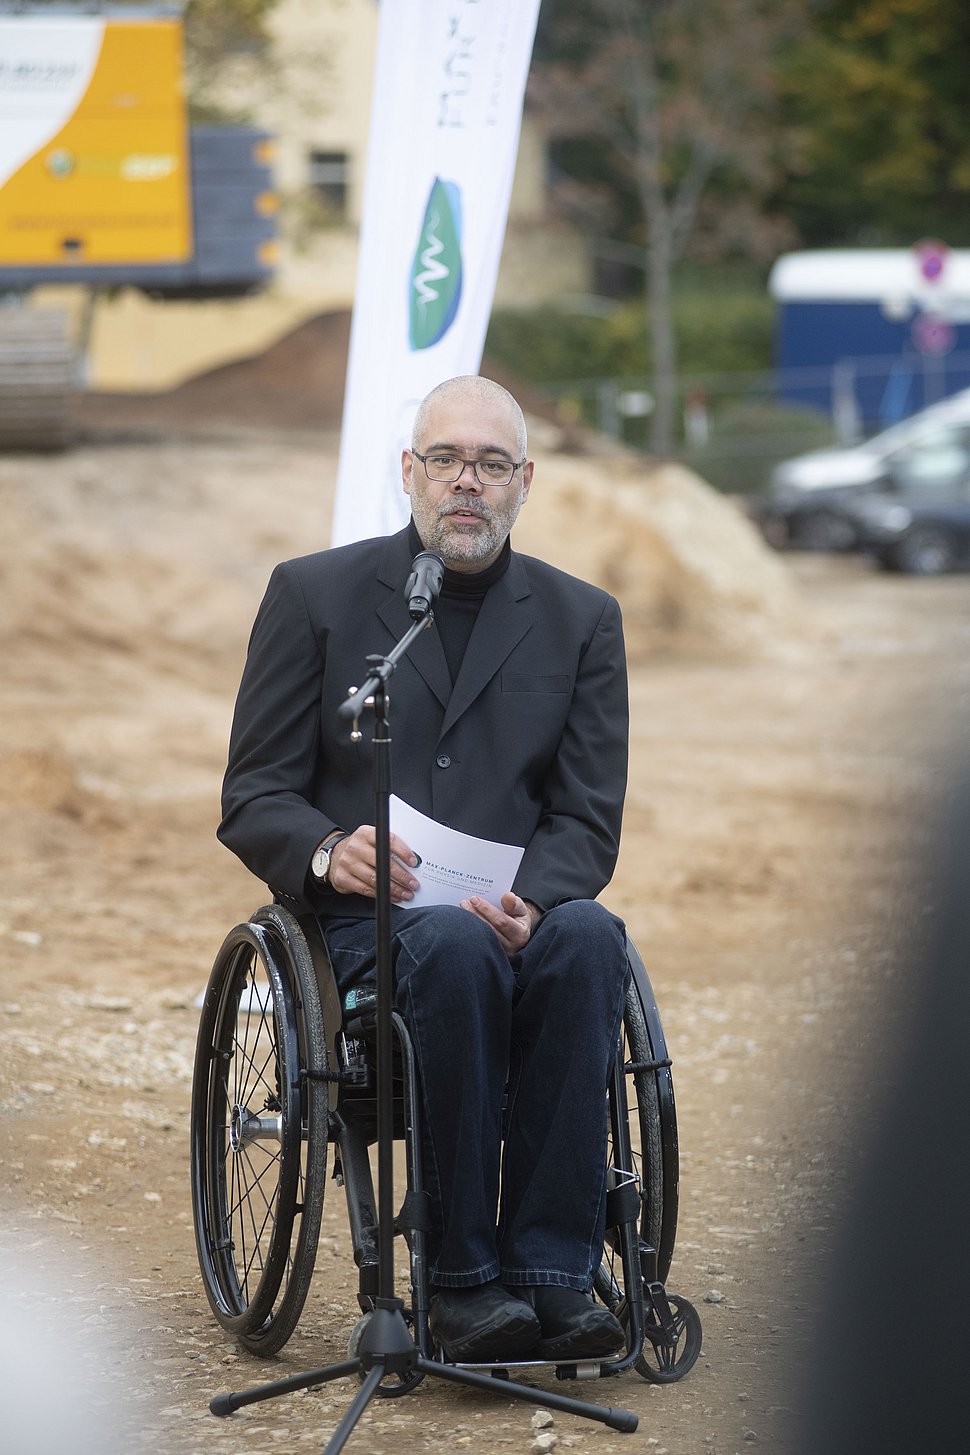 Significance beyond Germany: Prof. Dr. Jochen Guck, Director at the Max Planck Institute for the Science of Light, during his speech at the symbolic ground-breaking ceremony for the start of construction of the Max-Planck-Zentrum für Physik und Medizin in Erlangen. The new research facility is a cooperation between the Max Planck Institute, Friedrich Alexander University Erlangen-Nürnberg and the University Hospital. Guck explained: The MPZPM has what it takes to become a beacon that shines far beyond Erlangen and Germany." 